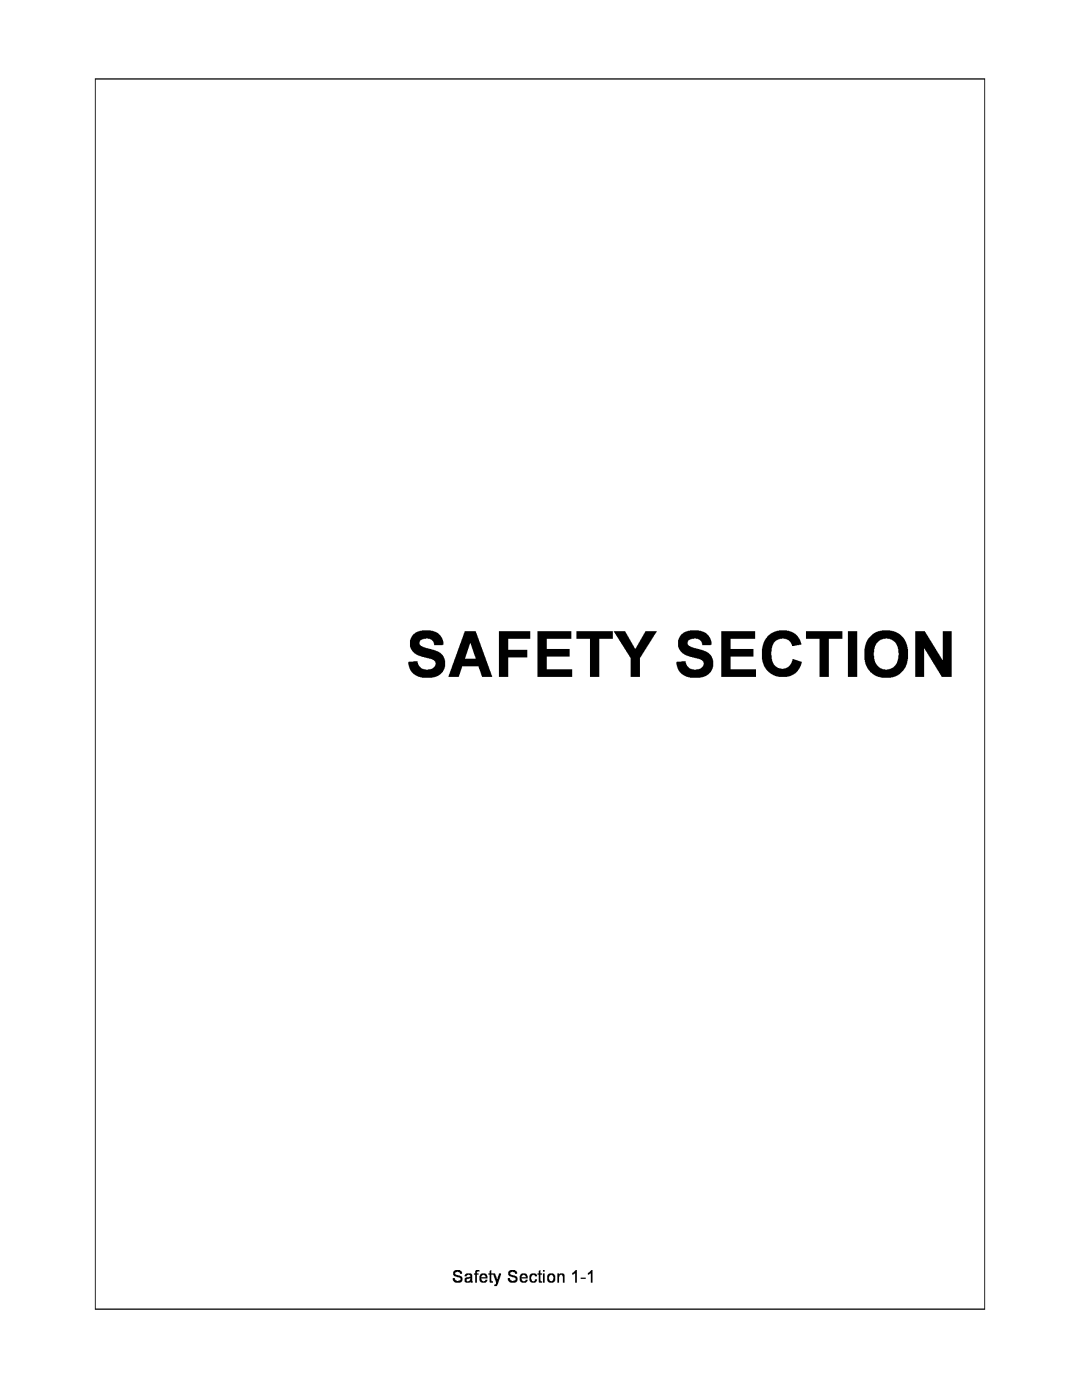 Rhino Mounts 2408 manual Safety Section 